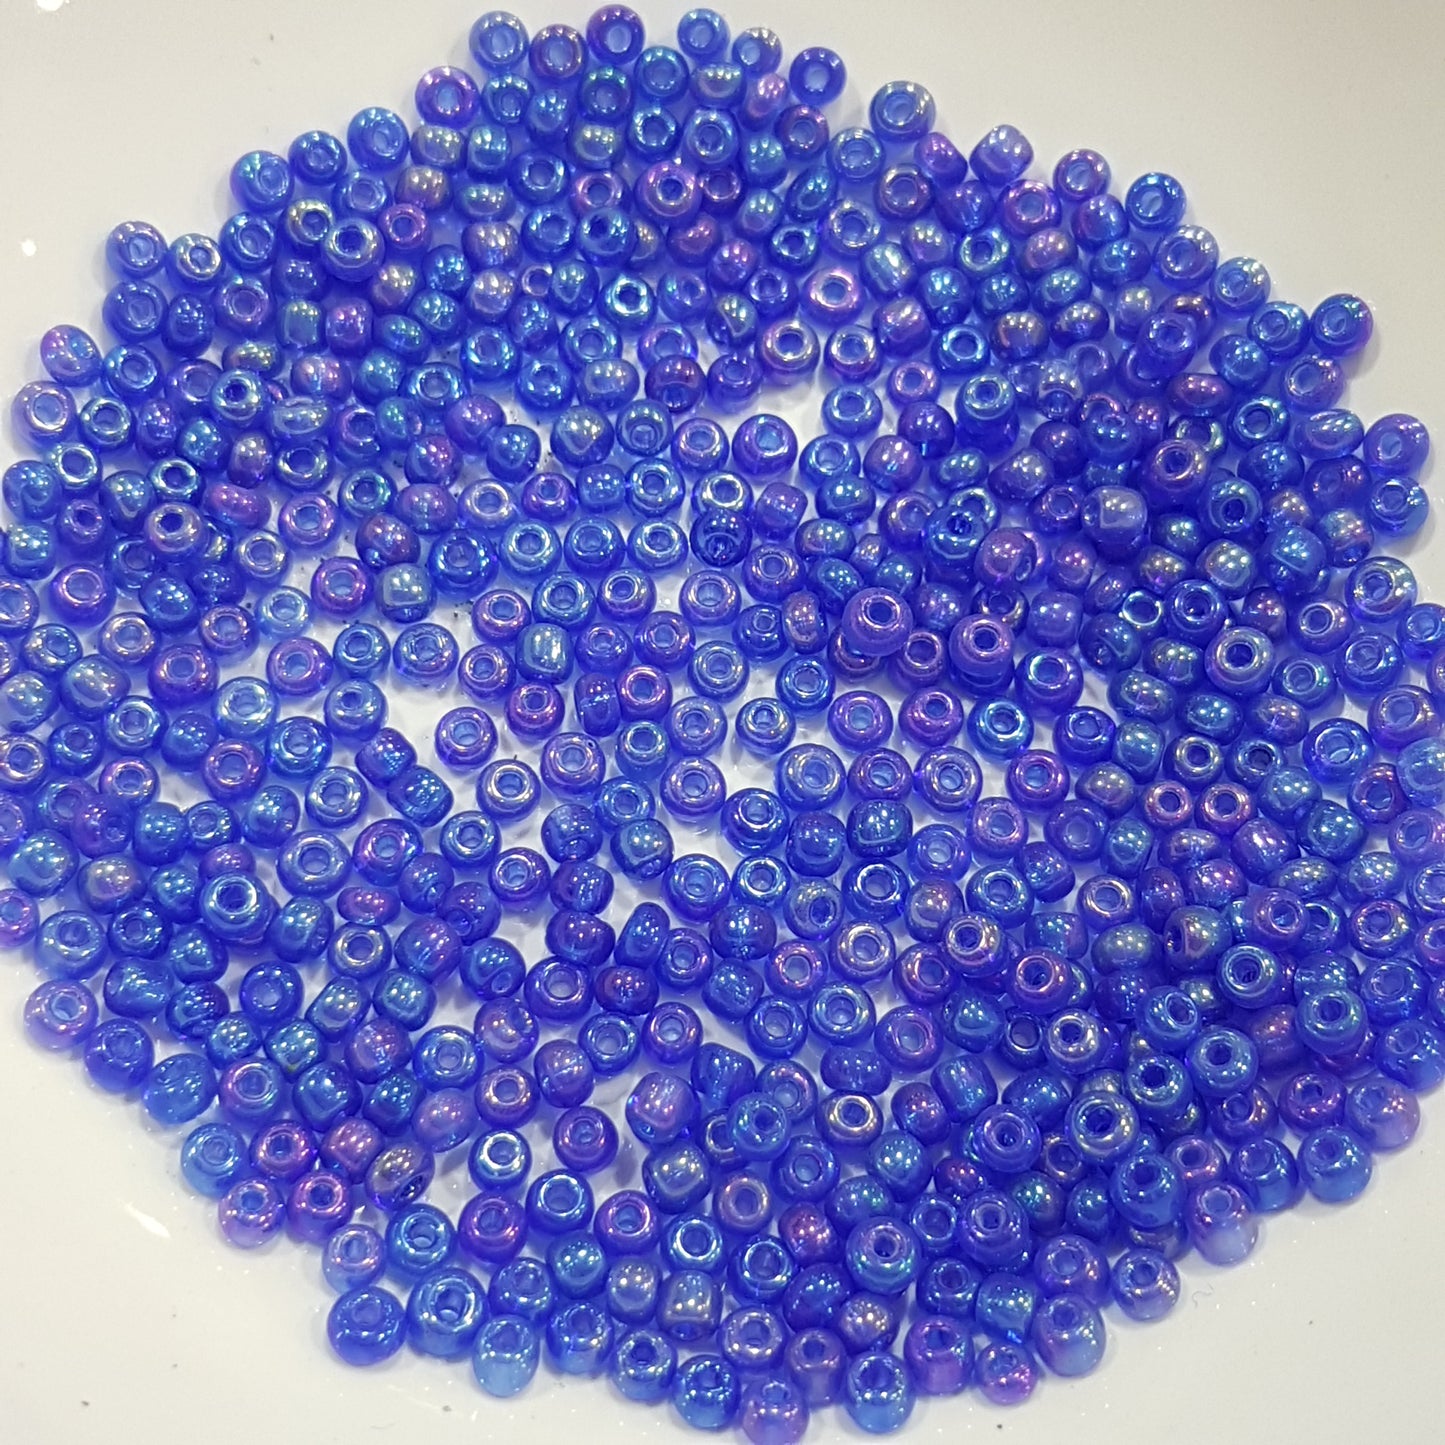 15g 3mm Blue AB Round Seed Beads